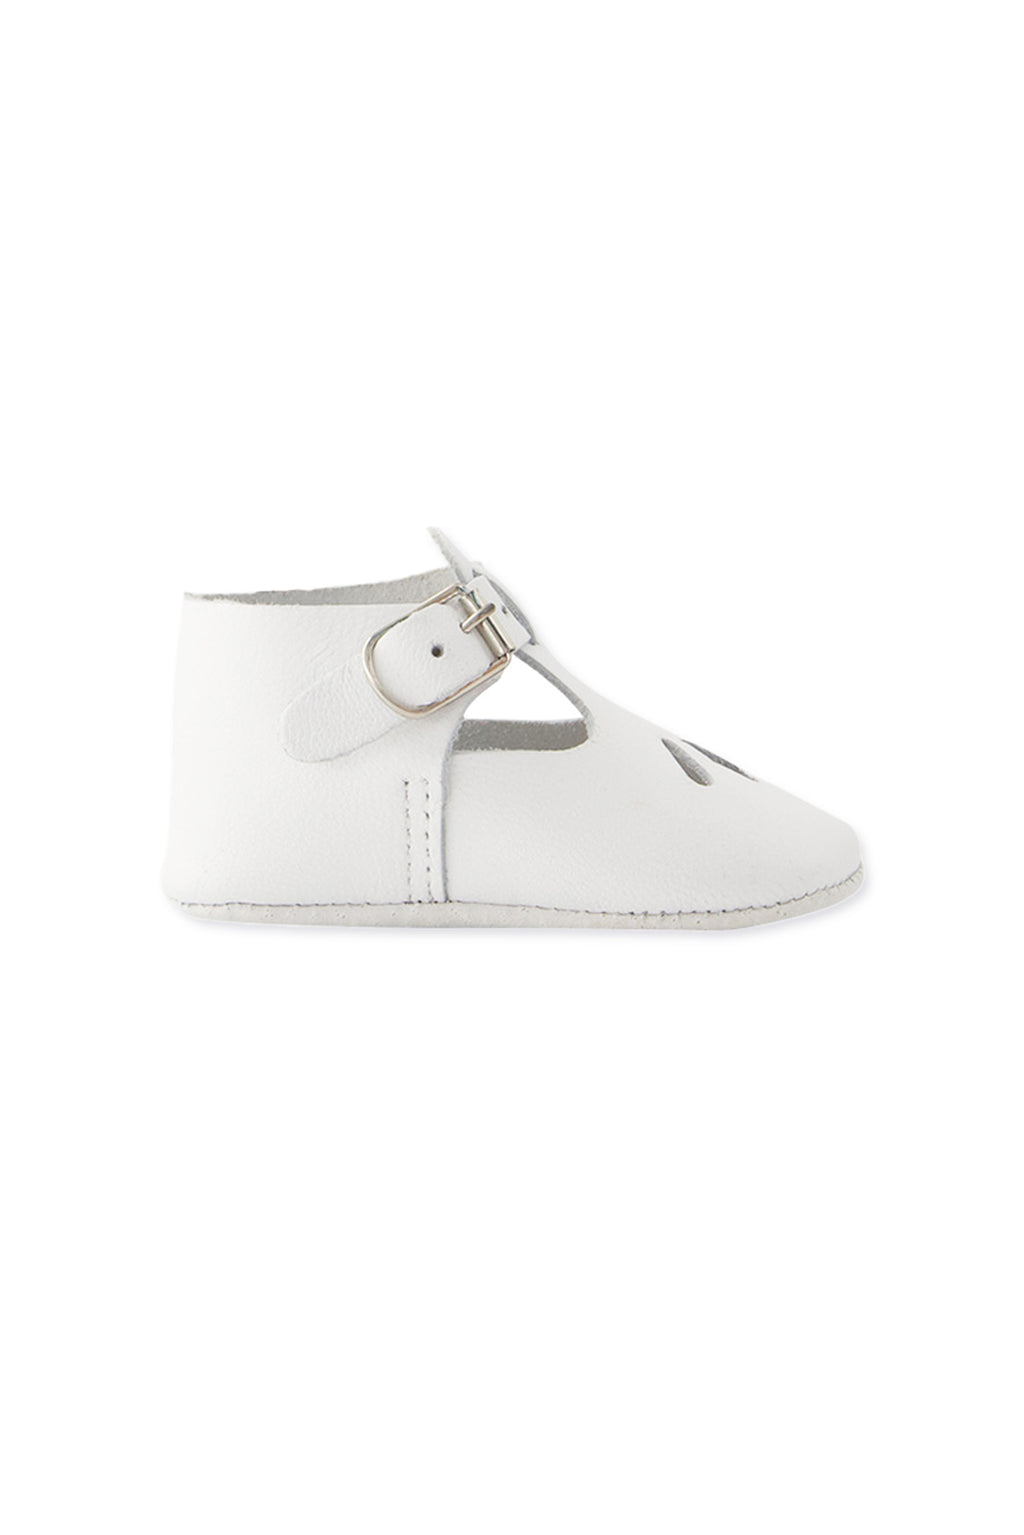 Shoes - White leather